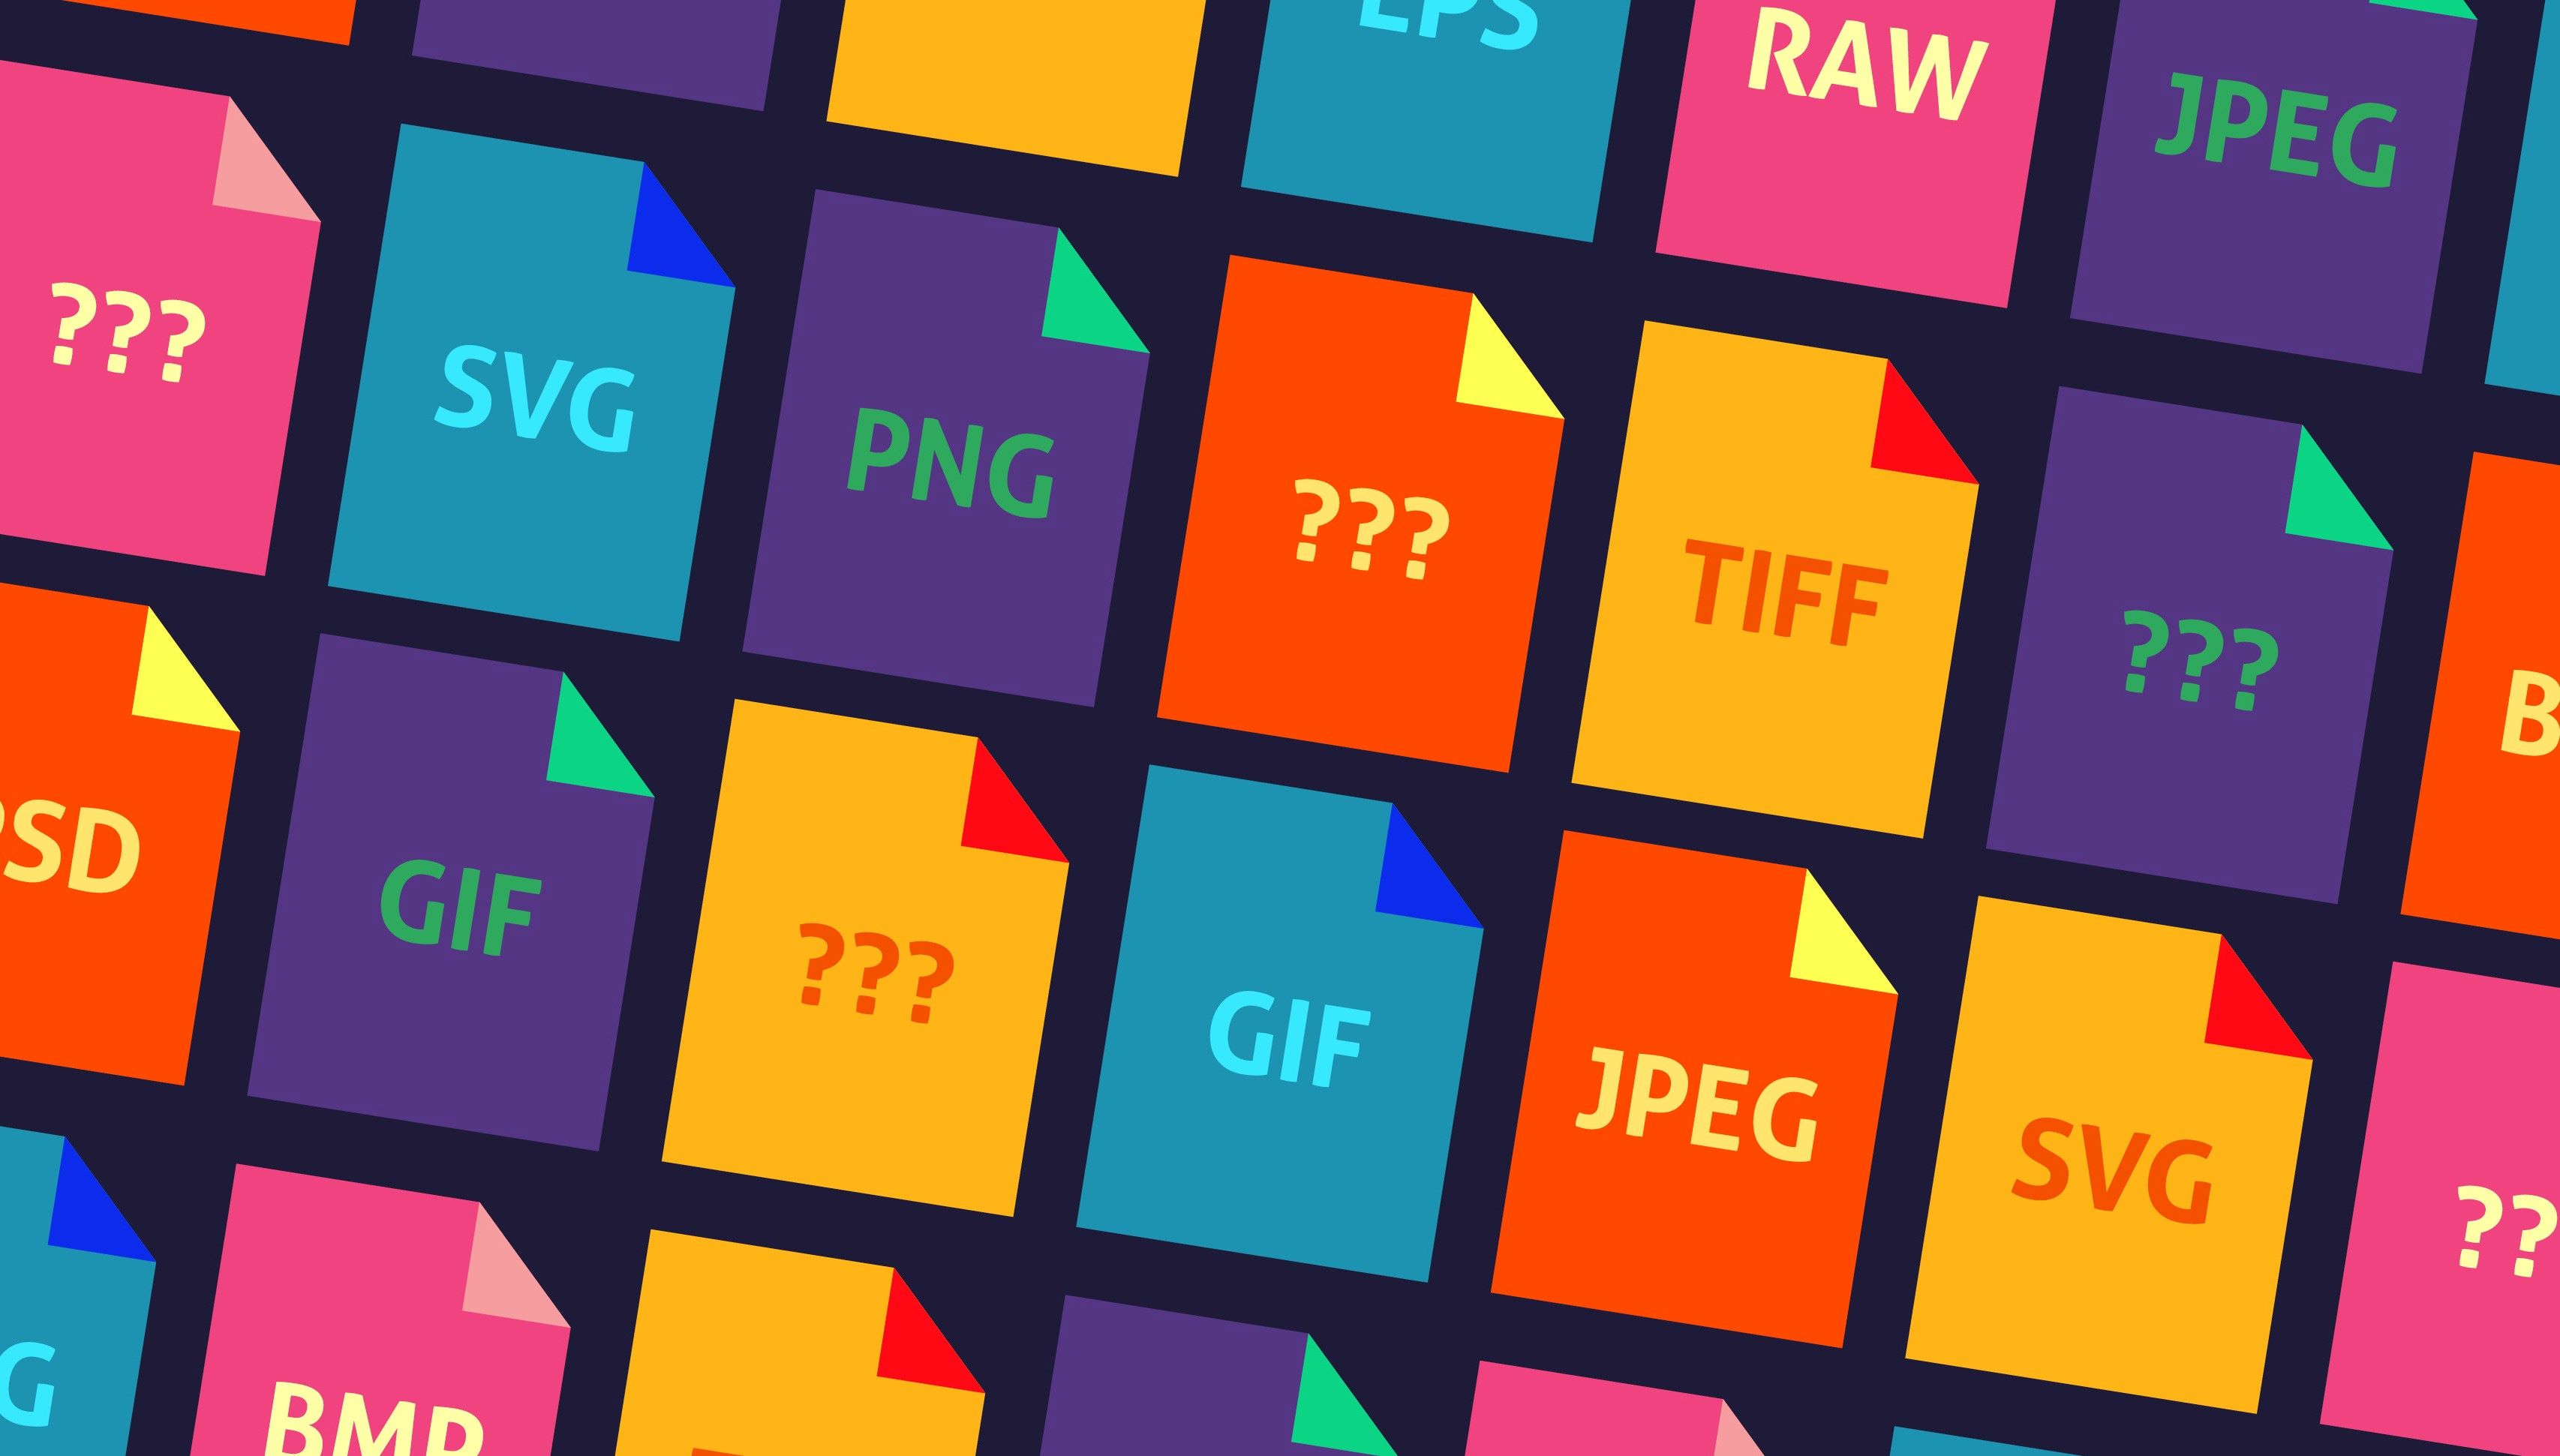 What Are Media File Formats?